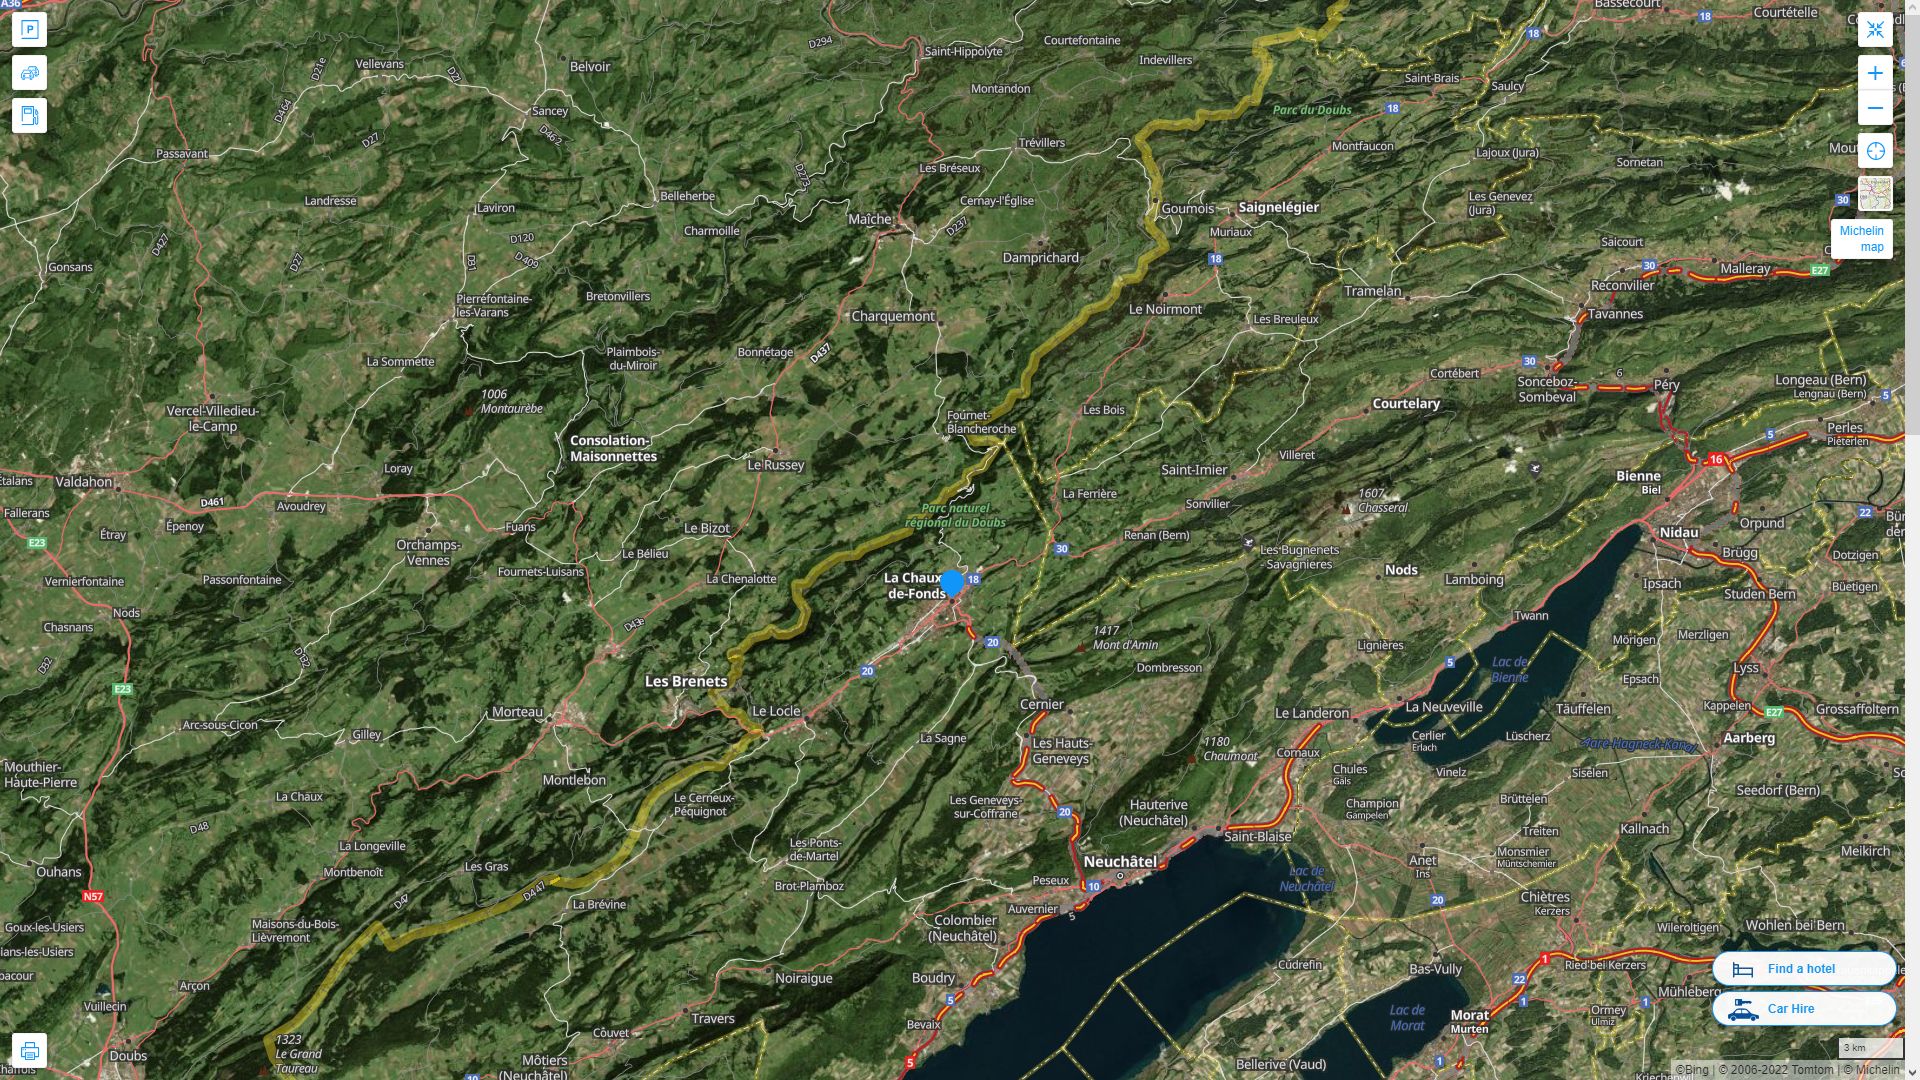 La Chaux e Fonds Highway and Road Map with Satellite View